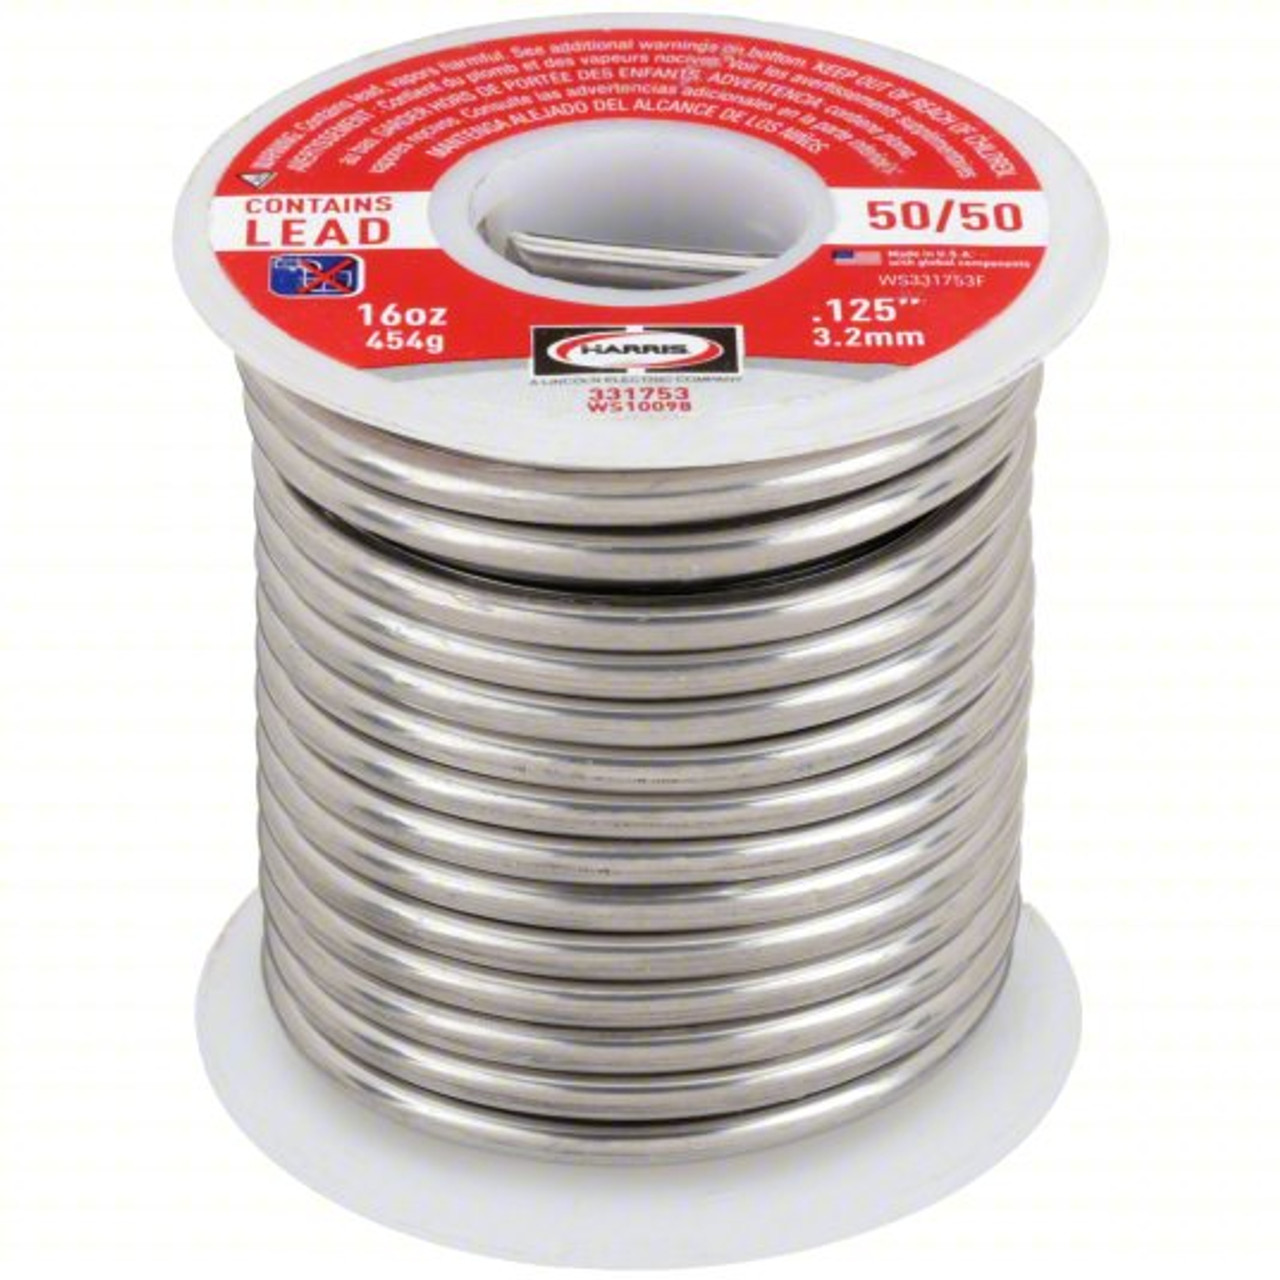 HARRIS Solder Wire: 1/8 in x 1 lb, 50/50, 50% Tin, 50% Lead (2-Pack)